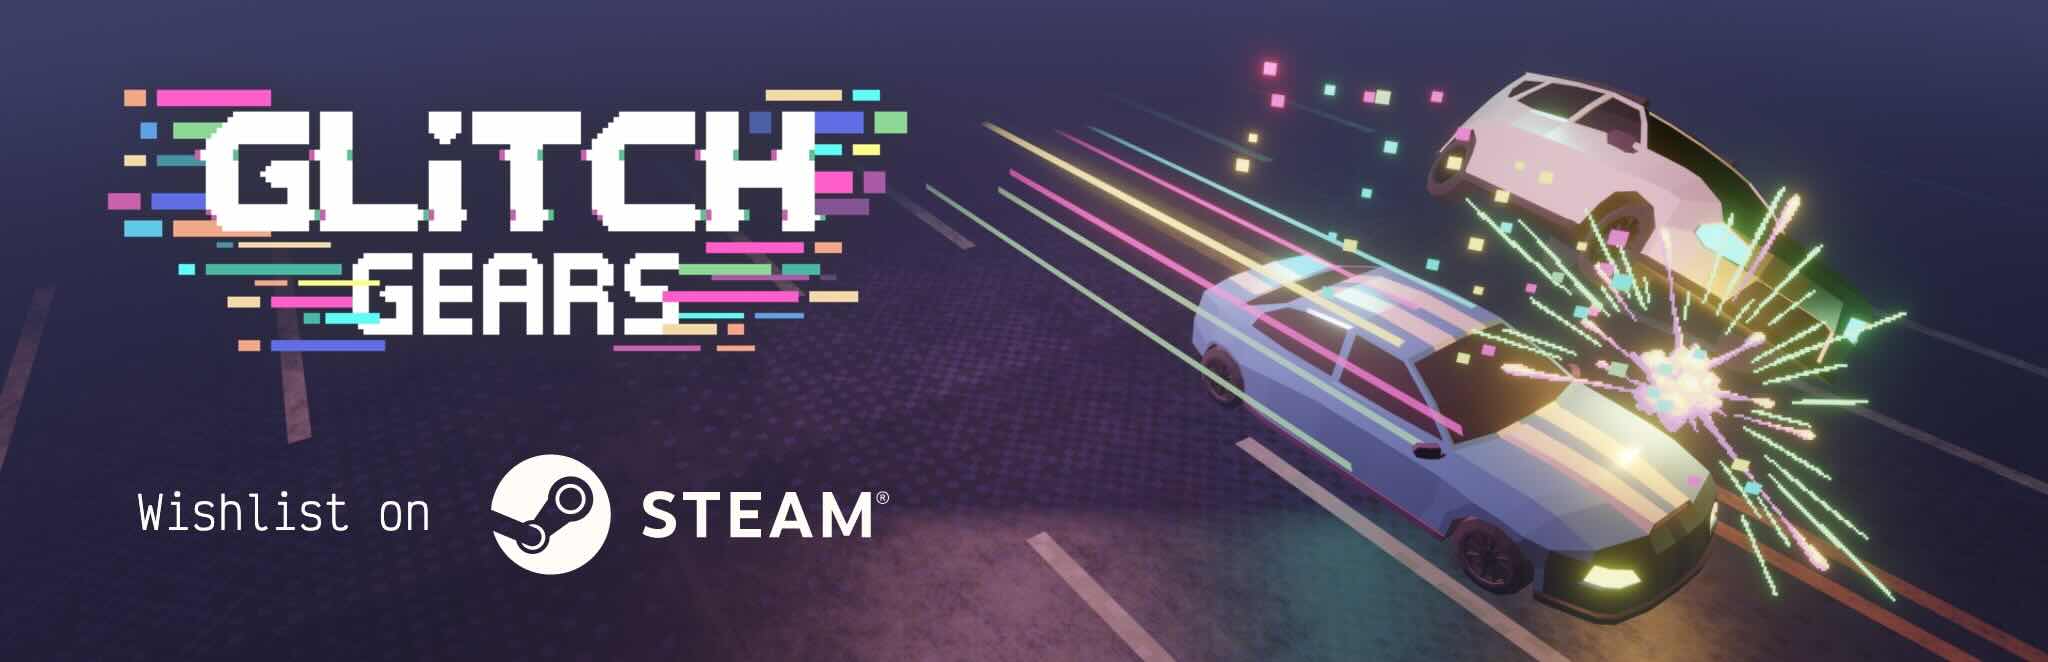 Promotional banner for Glitch Gears, featuring a blue car with colorful light trails and digital effects, against a night background. Includes 'Wishlist on Steam' with the Steam logo.